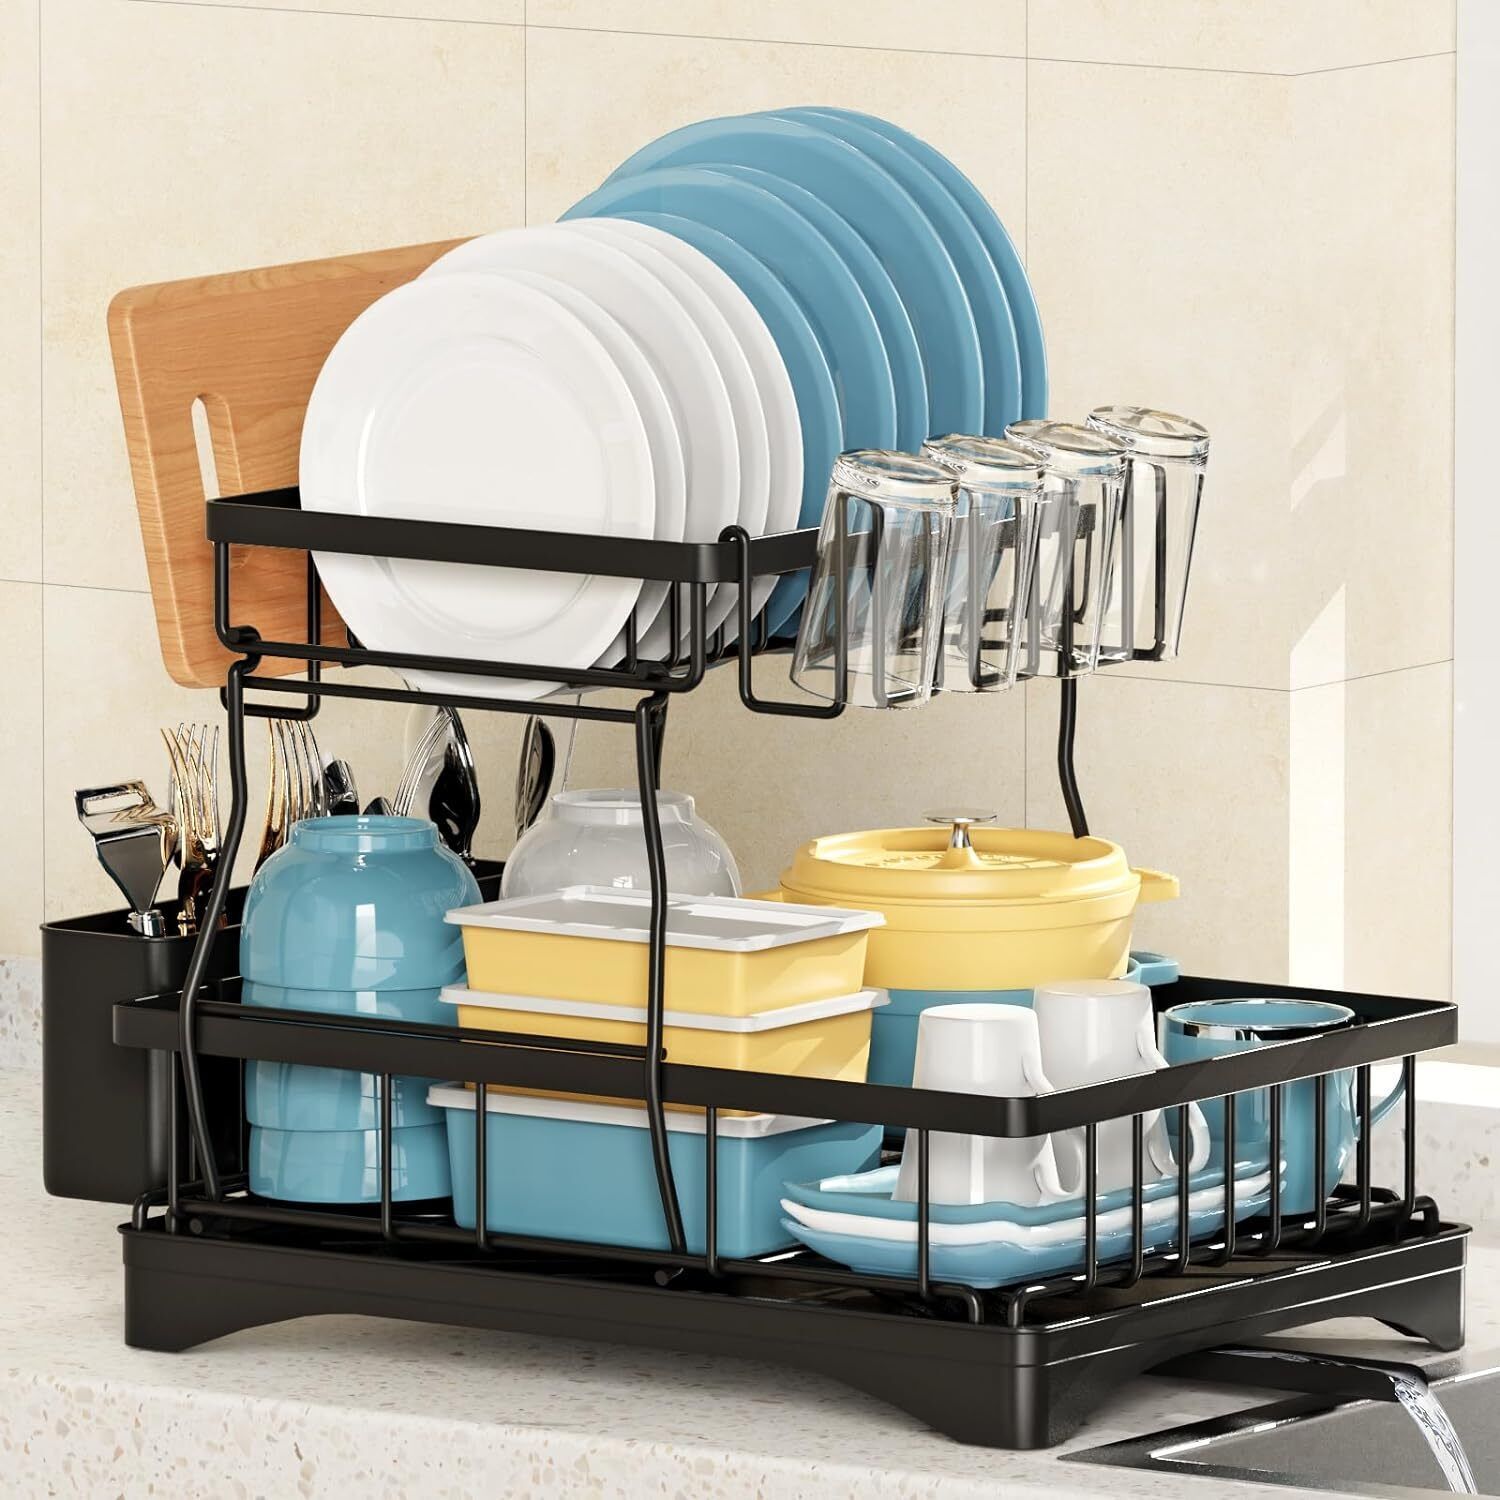 Primary image for Kitchen Dish Cup Drying Rack Utensil Drainer Dryer Tray Cutlery Holder Organizer